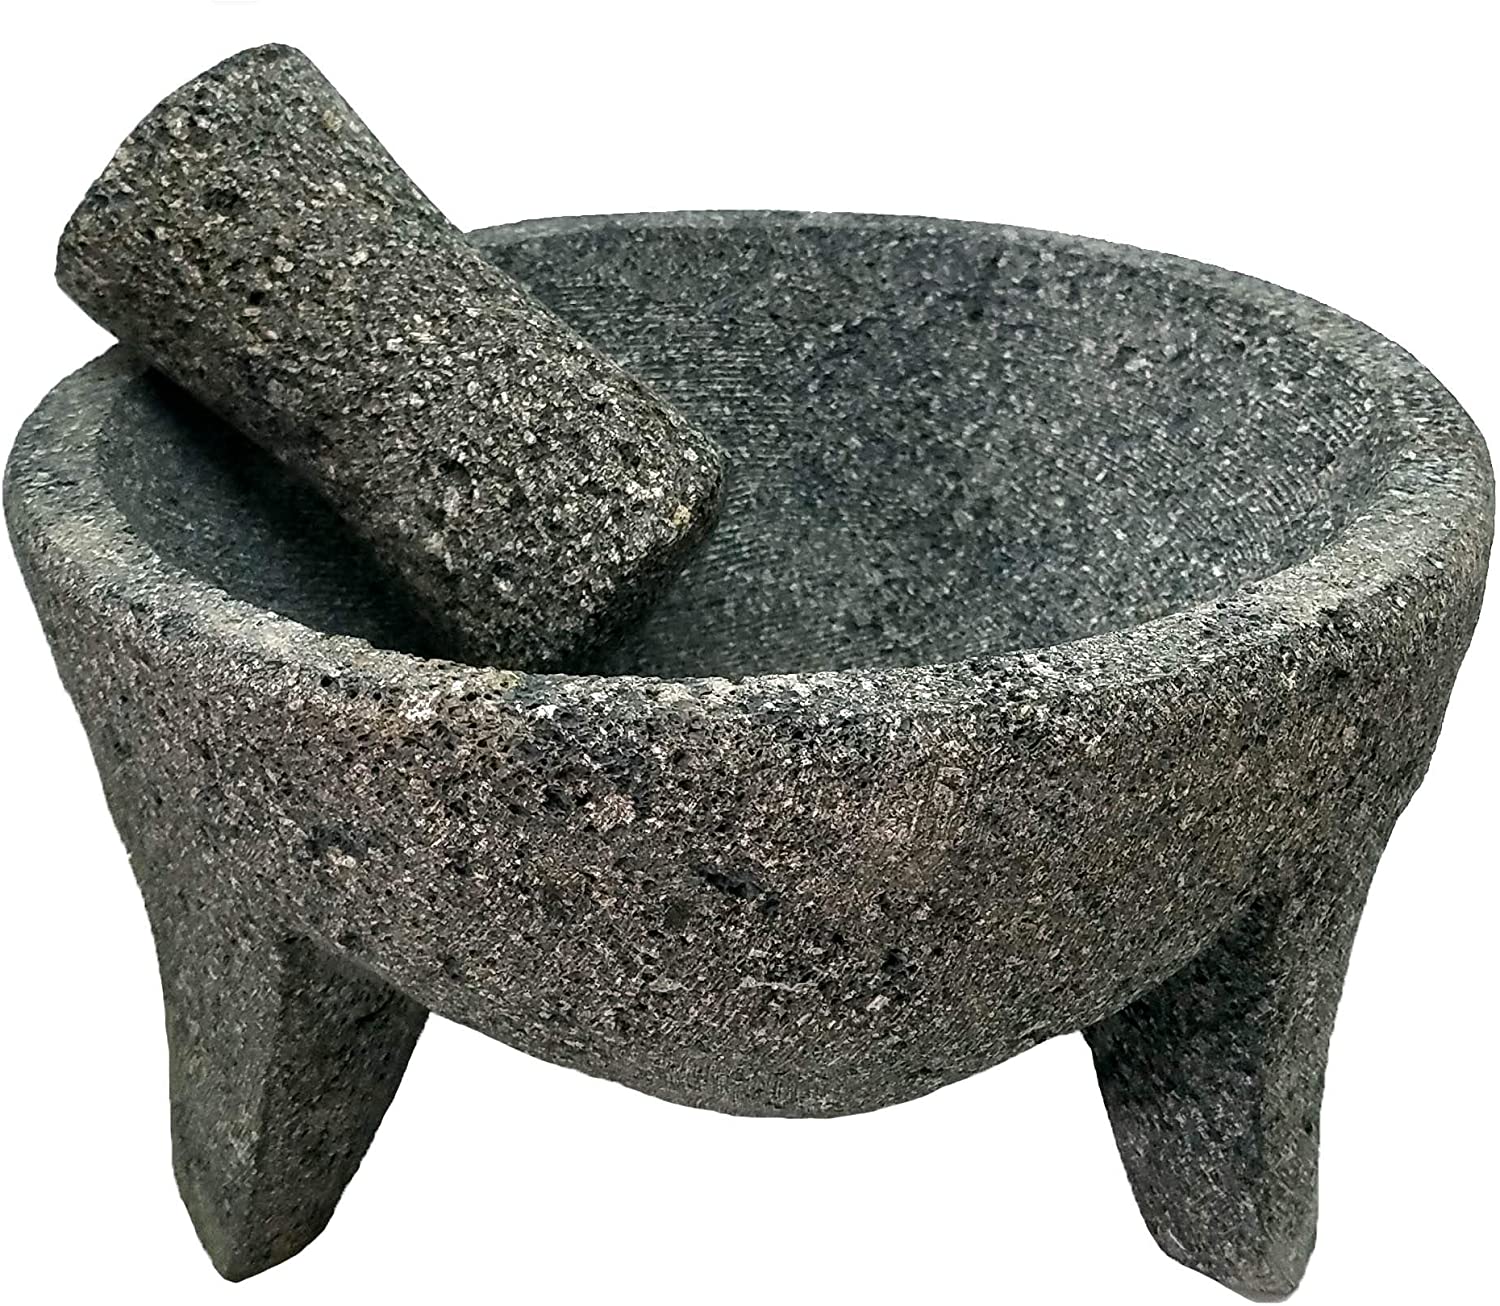 PRODUCTOS DE PIEDRA VOLCANICA / Classic 8'' Molcajete Mortar and Pestle Set / Prepare authentic dishes with this beautiful handcrafted molcajete mortar and pestle set.